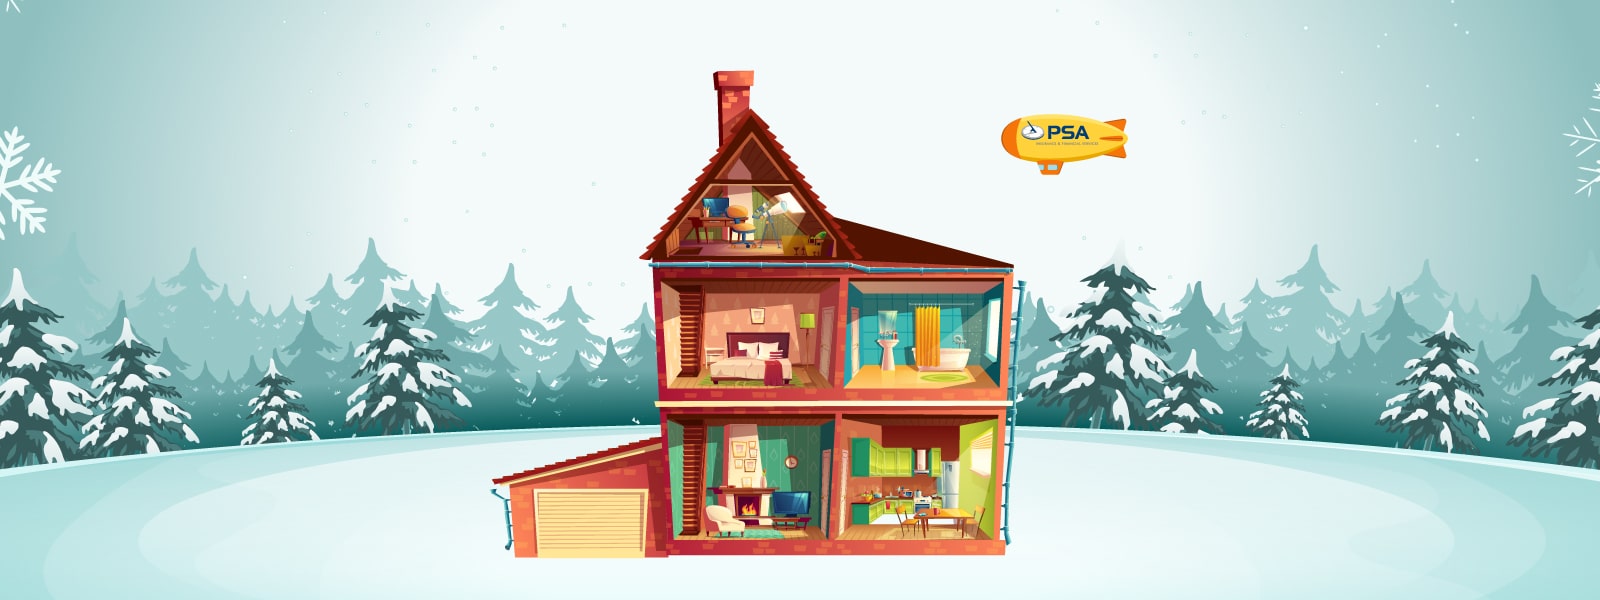 Graphic of a house on PSA Financial's website